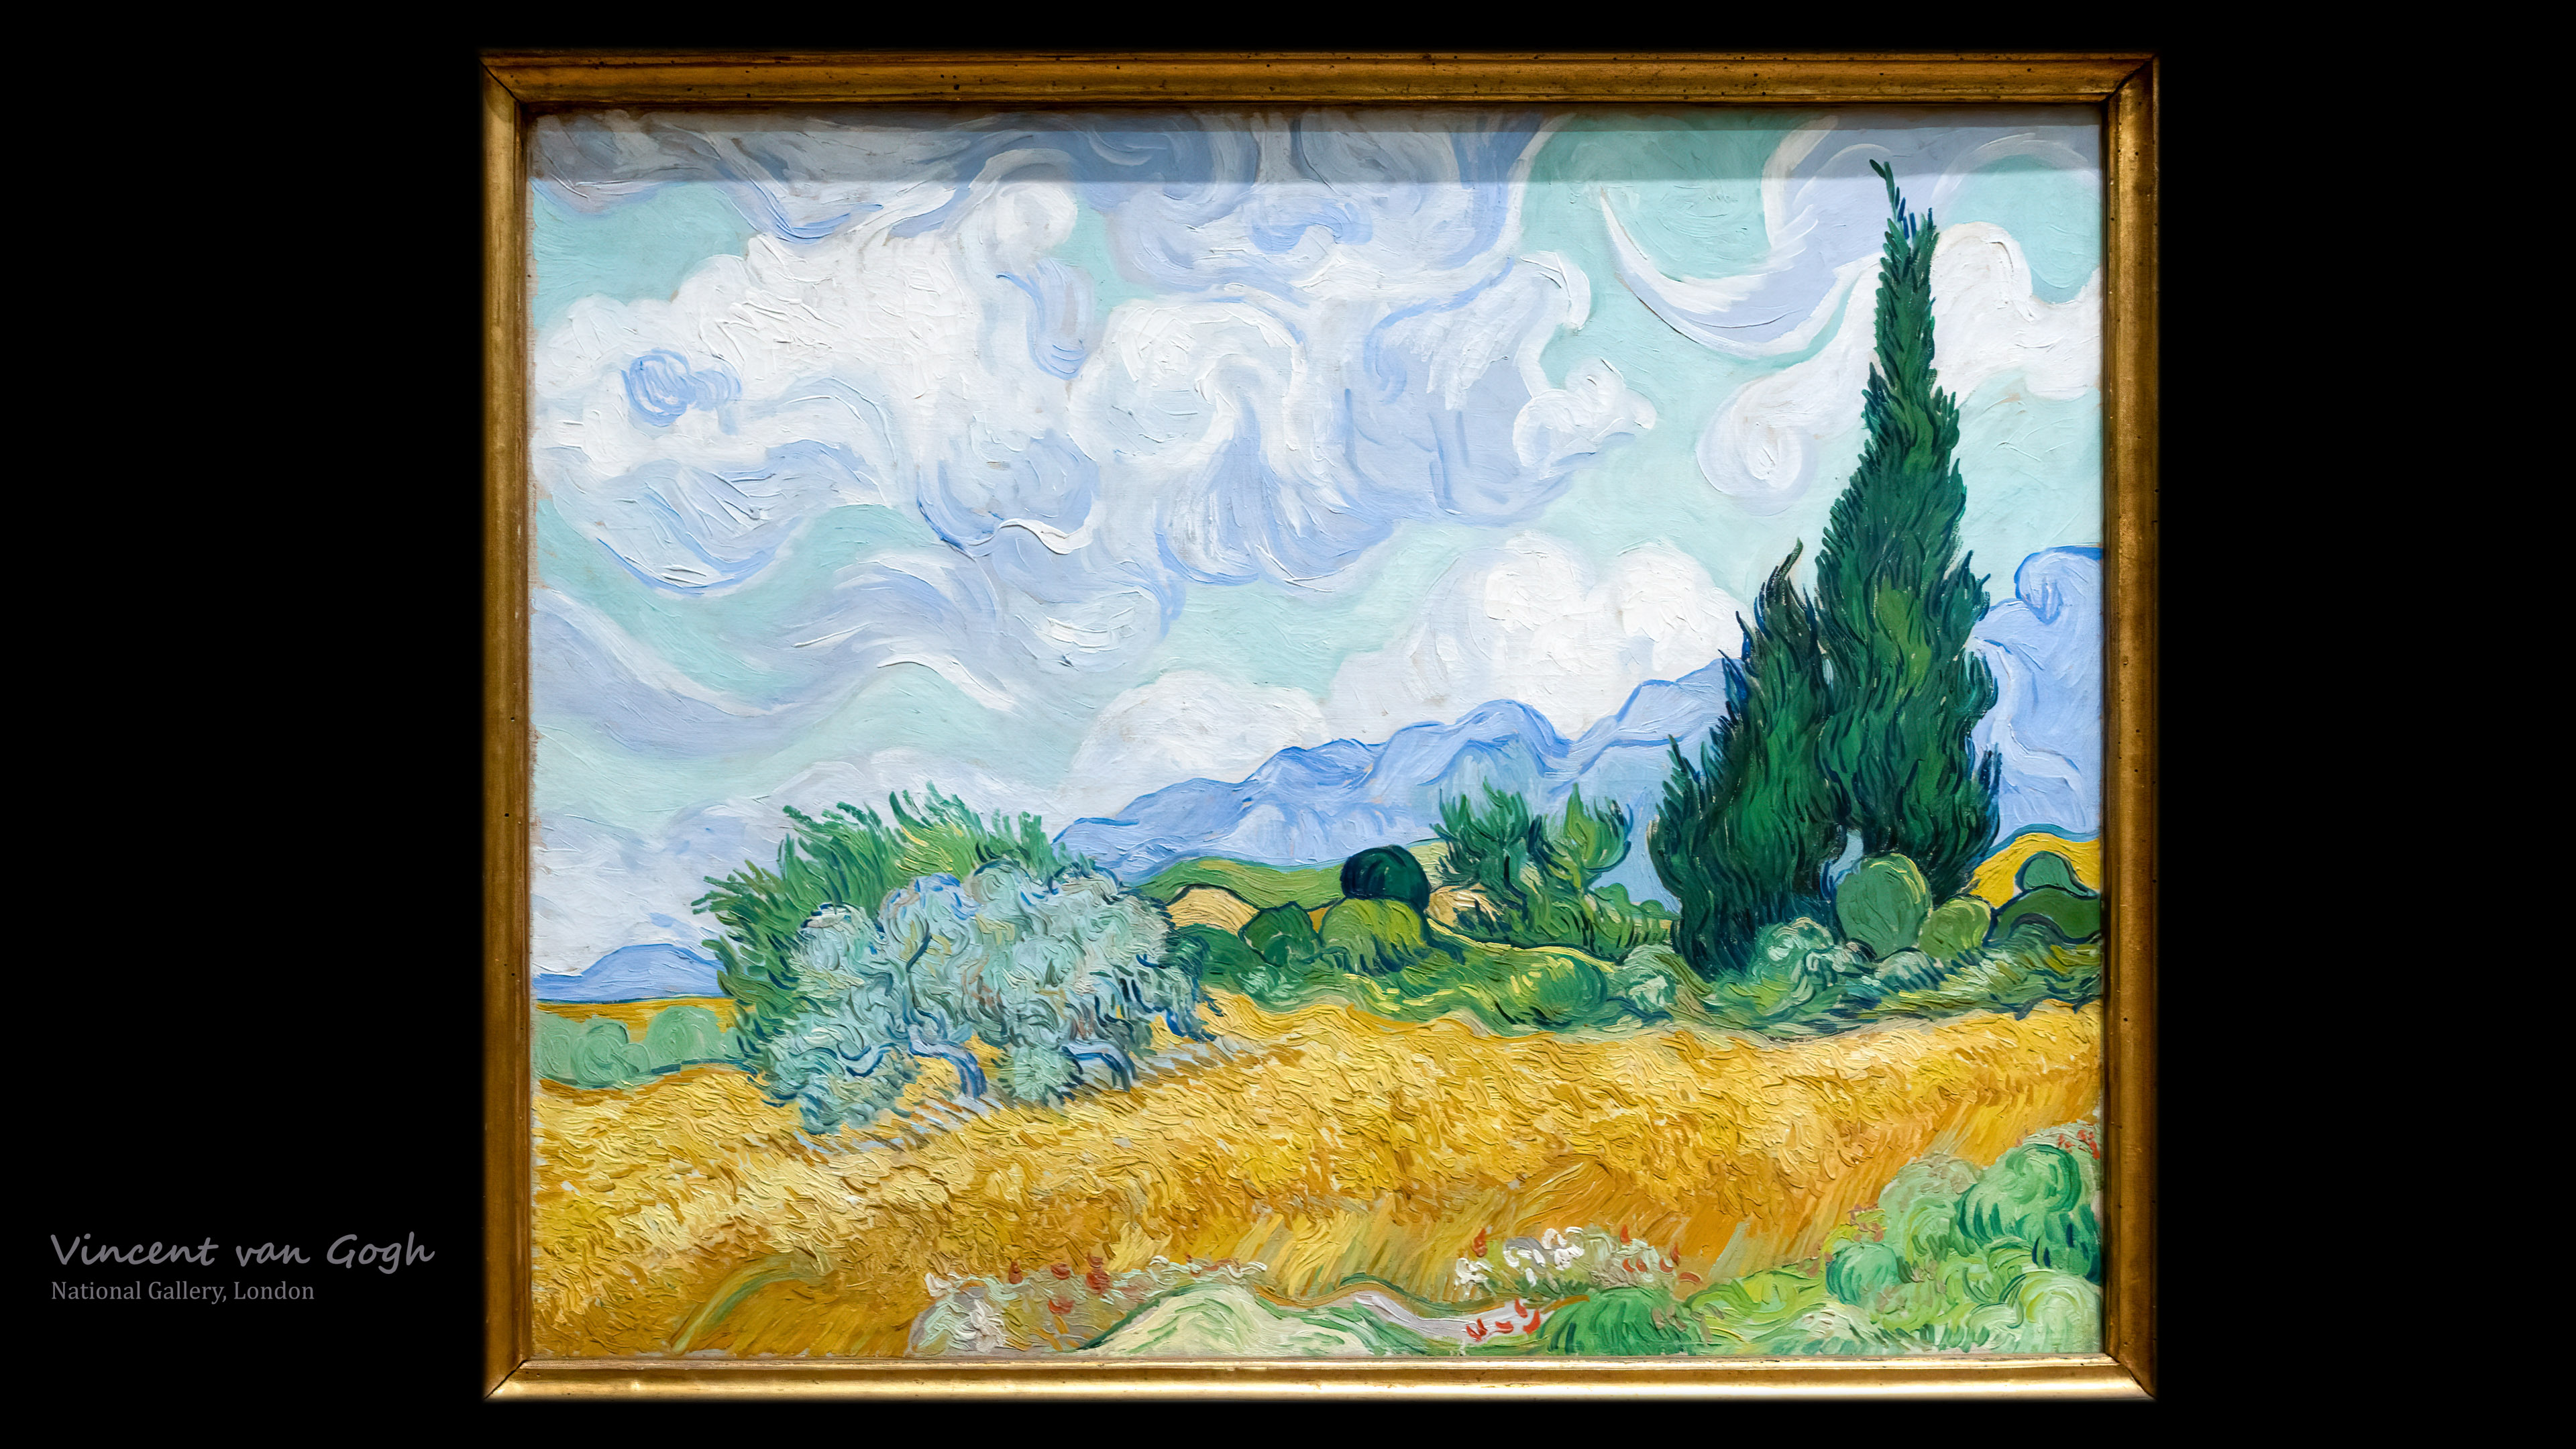 Experience the tranquility and beauty of nature with Wheat Field with Cypresses wallpaper, featuring the serene and soothing view of the Provencal landscape that Van Gogh painted in 1889.